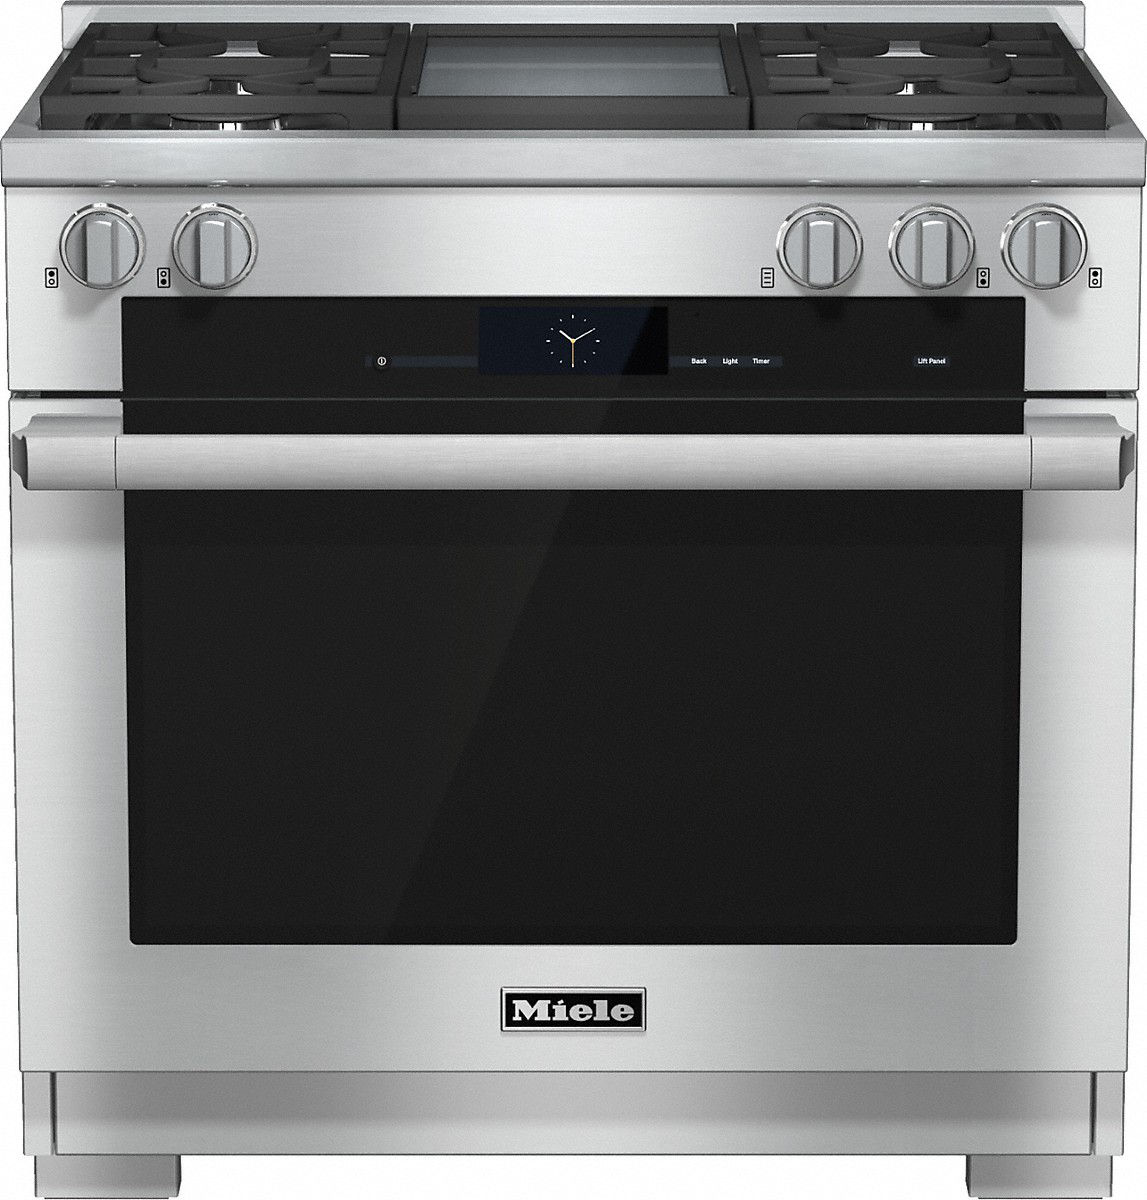 Miele - 5.8 cu. ft  Dual Fuel Range in Stainless - HR 1936-2 LP